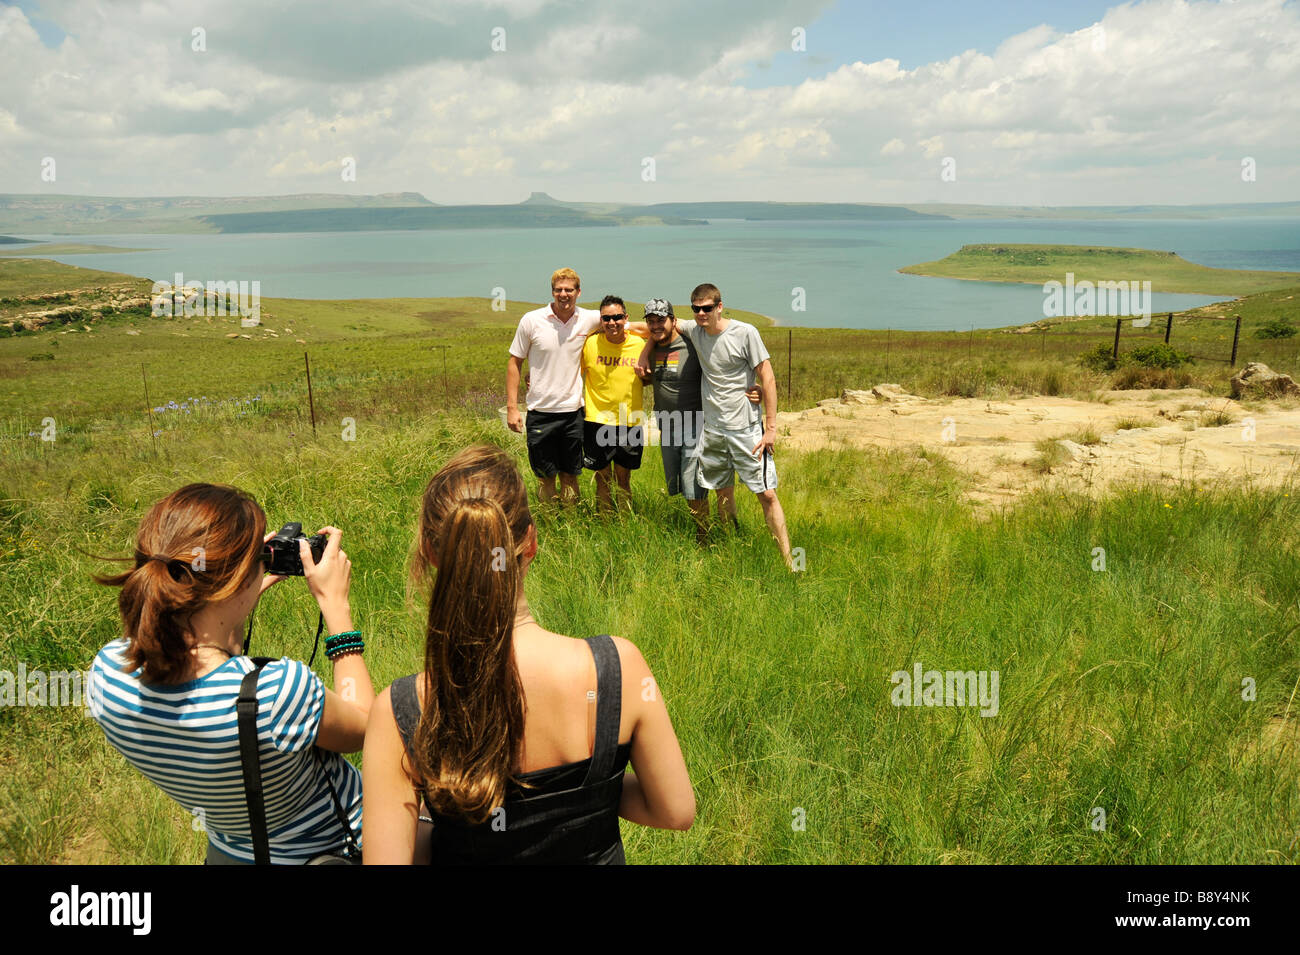 Berville, KwaZulu-Natal, South Africa, landscape, people, unknown group of young adult men posing for holiday photograph, Sterkfontein dam, candid Stock Photo